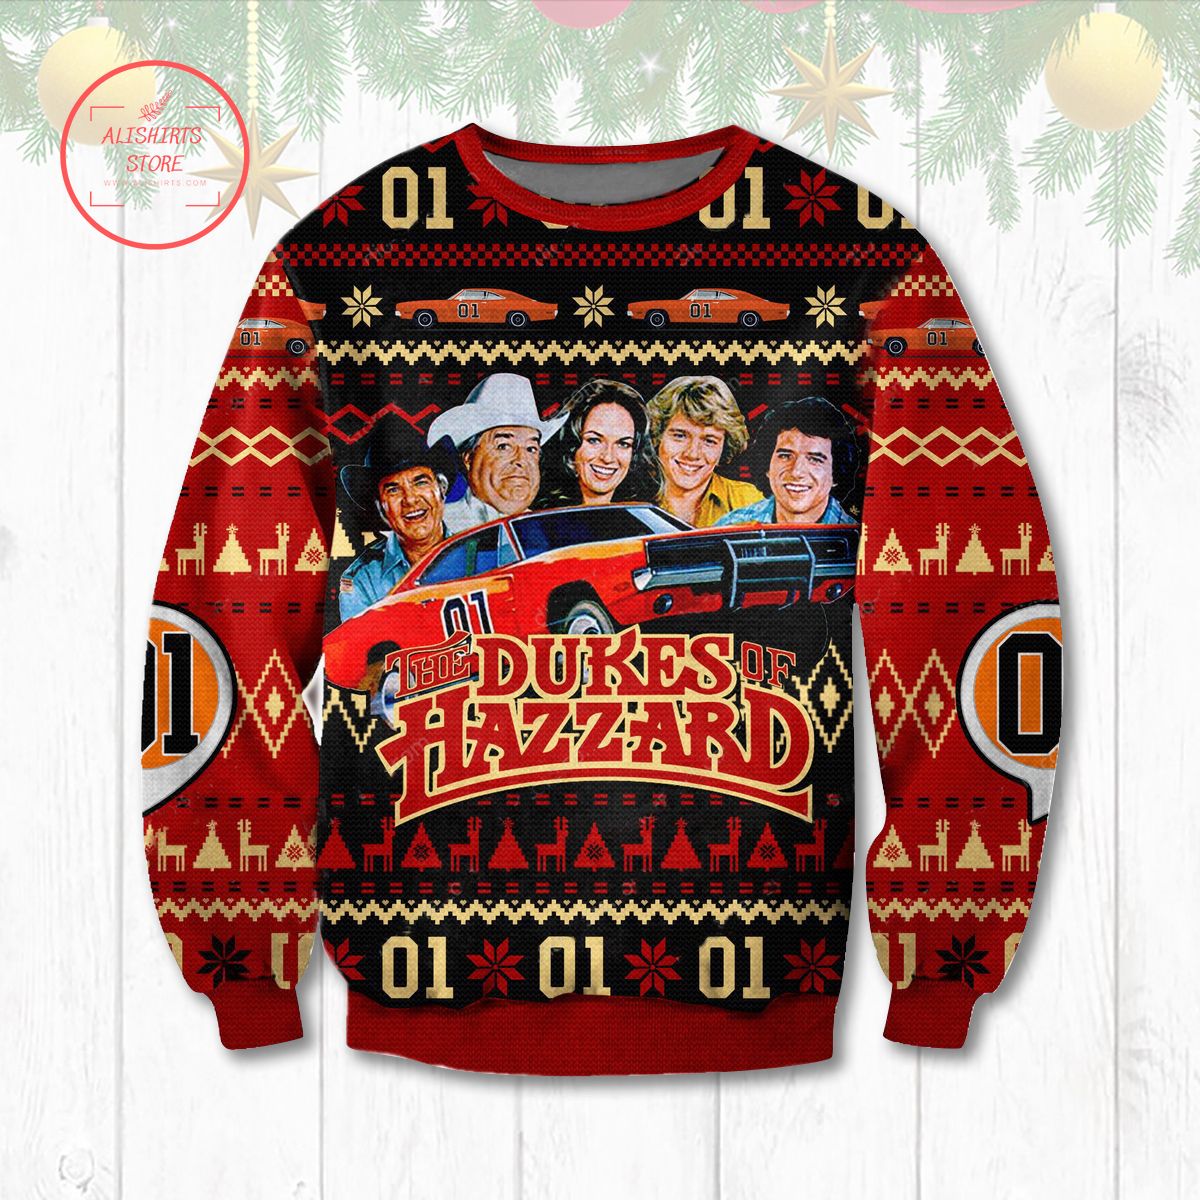 The Dukes of Hazzard Ugly Christmas Sweater